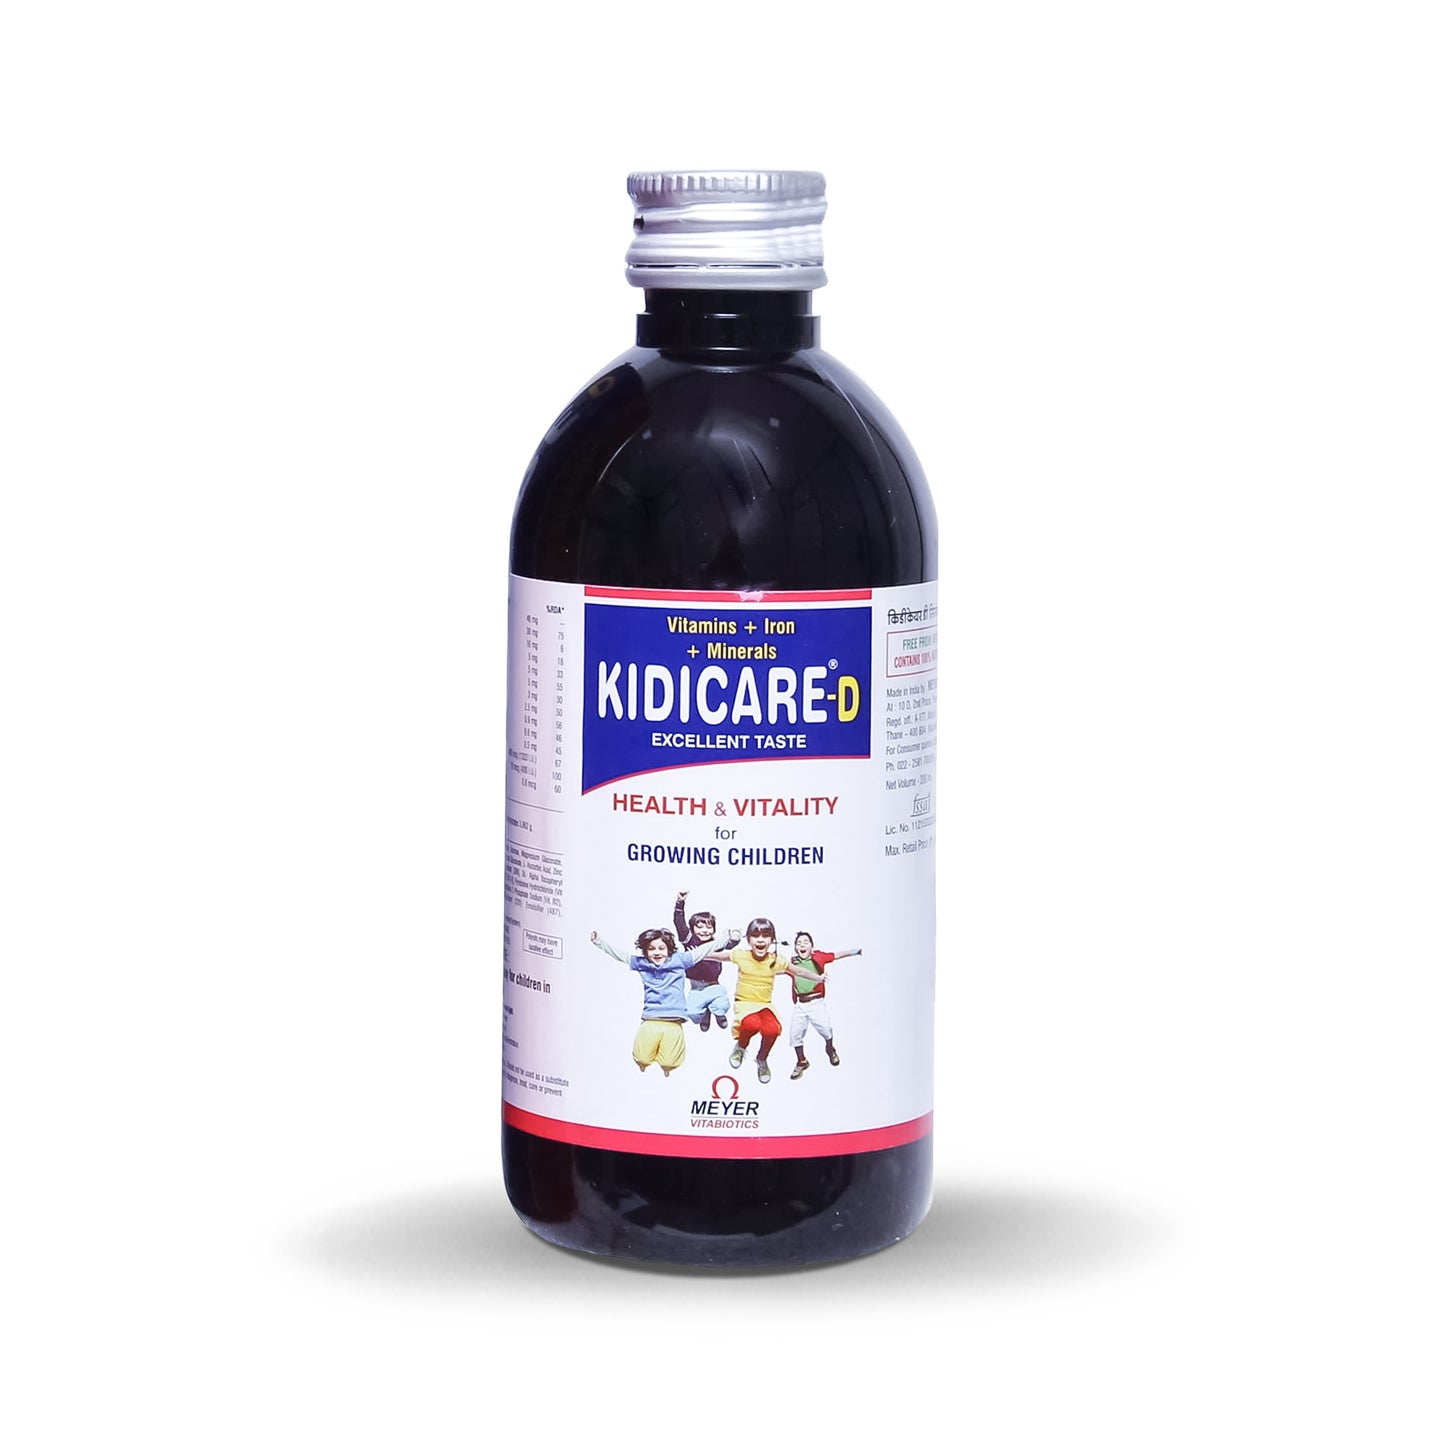 Kidicare-D Syrup, 200ml